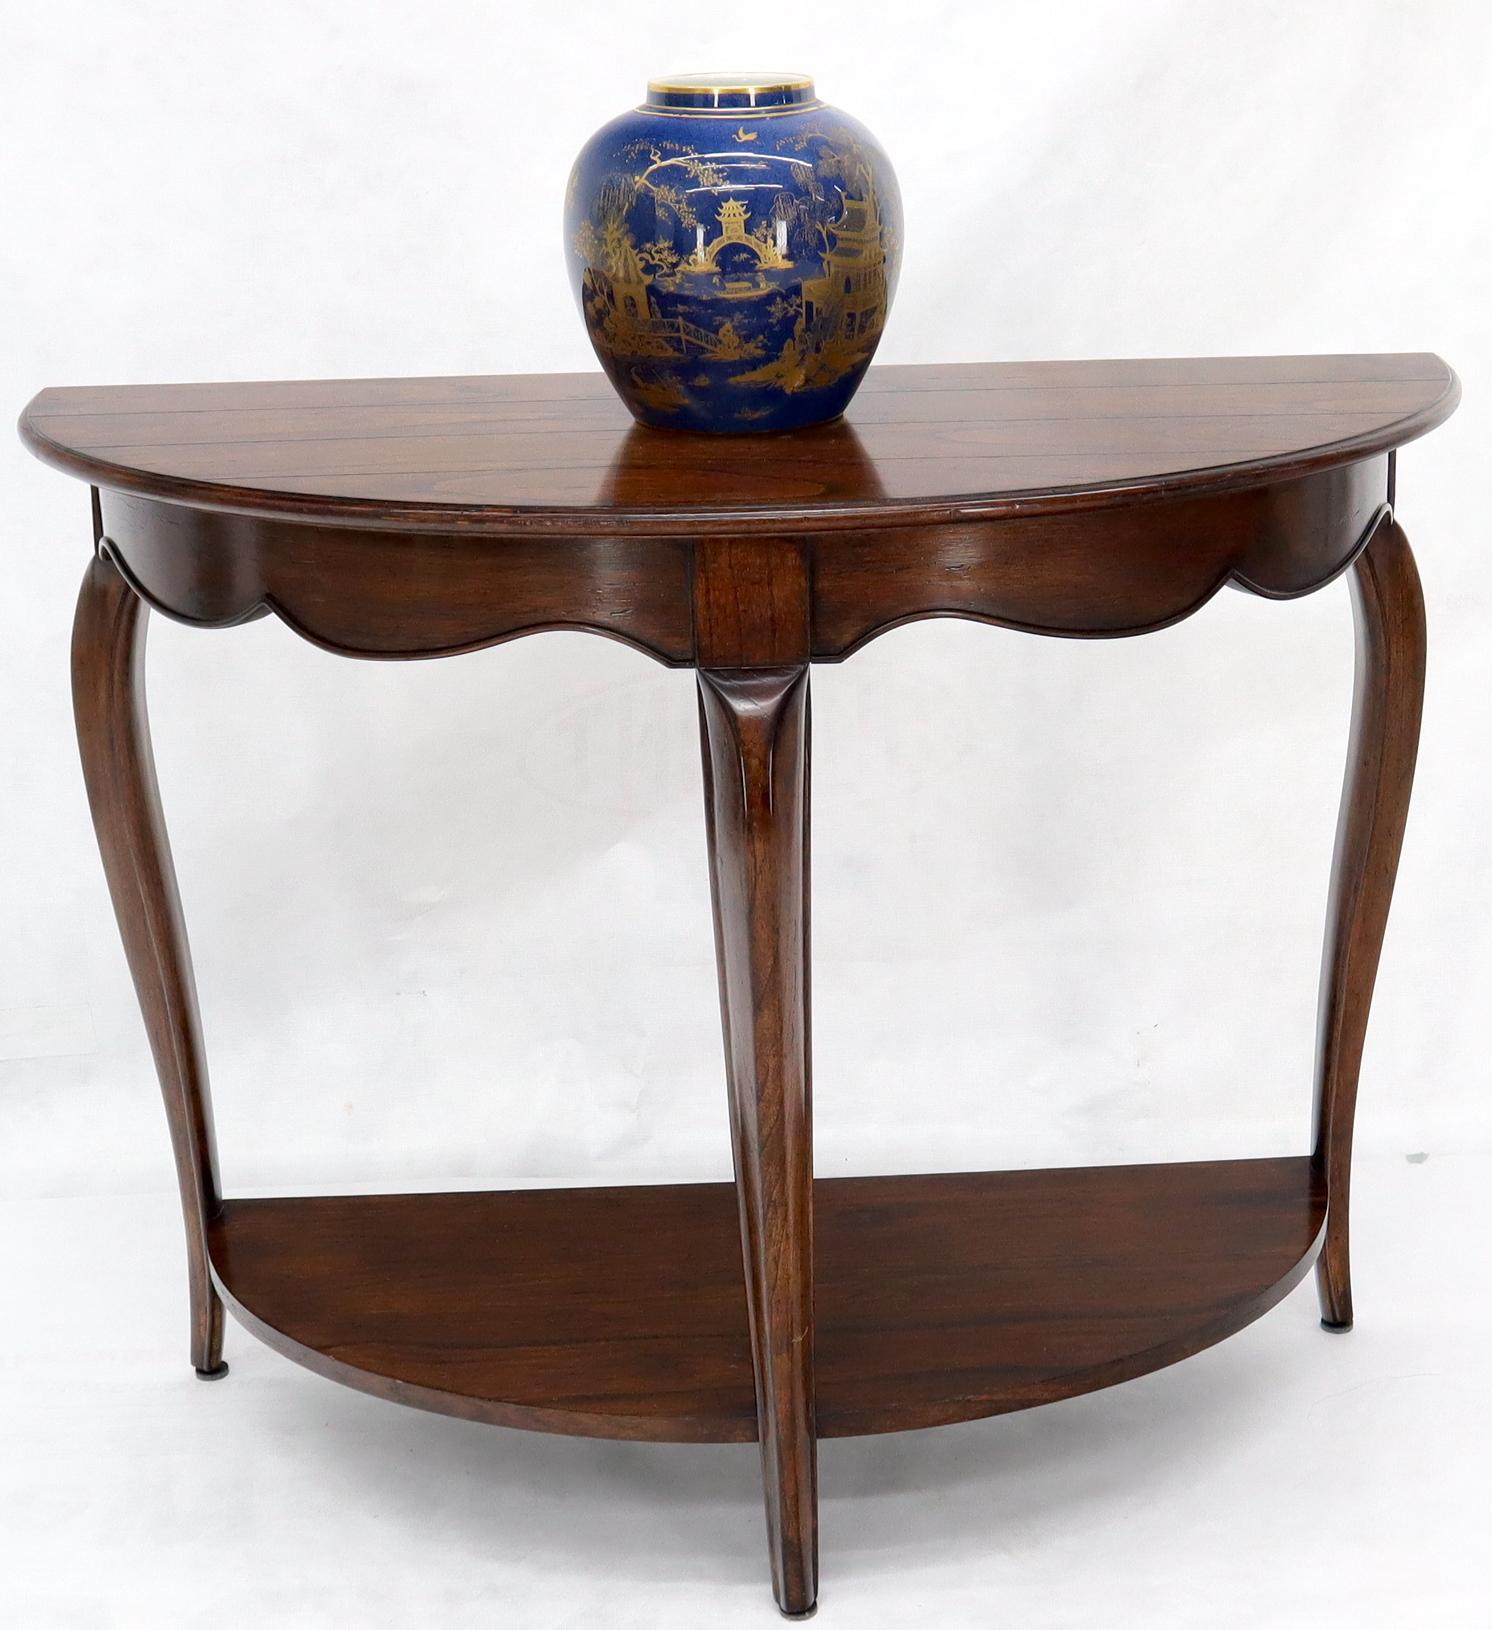 Demilune half round shape cabriole leg satin finish solid cherry one shelf wall hall table console by Baker.